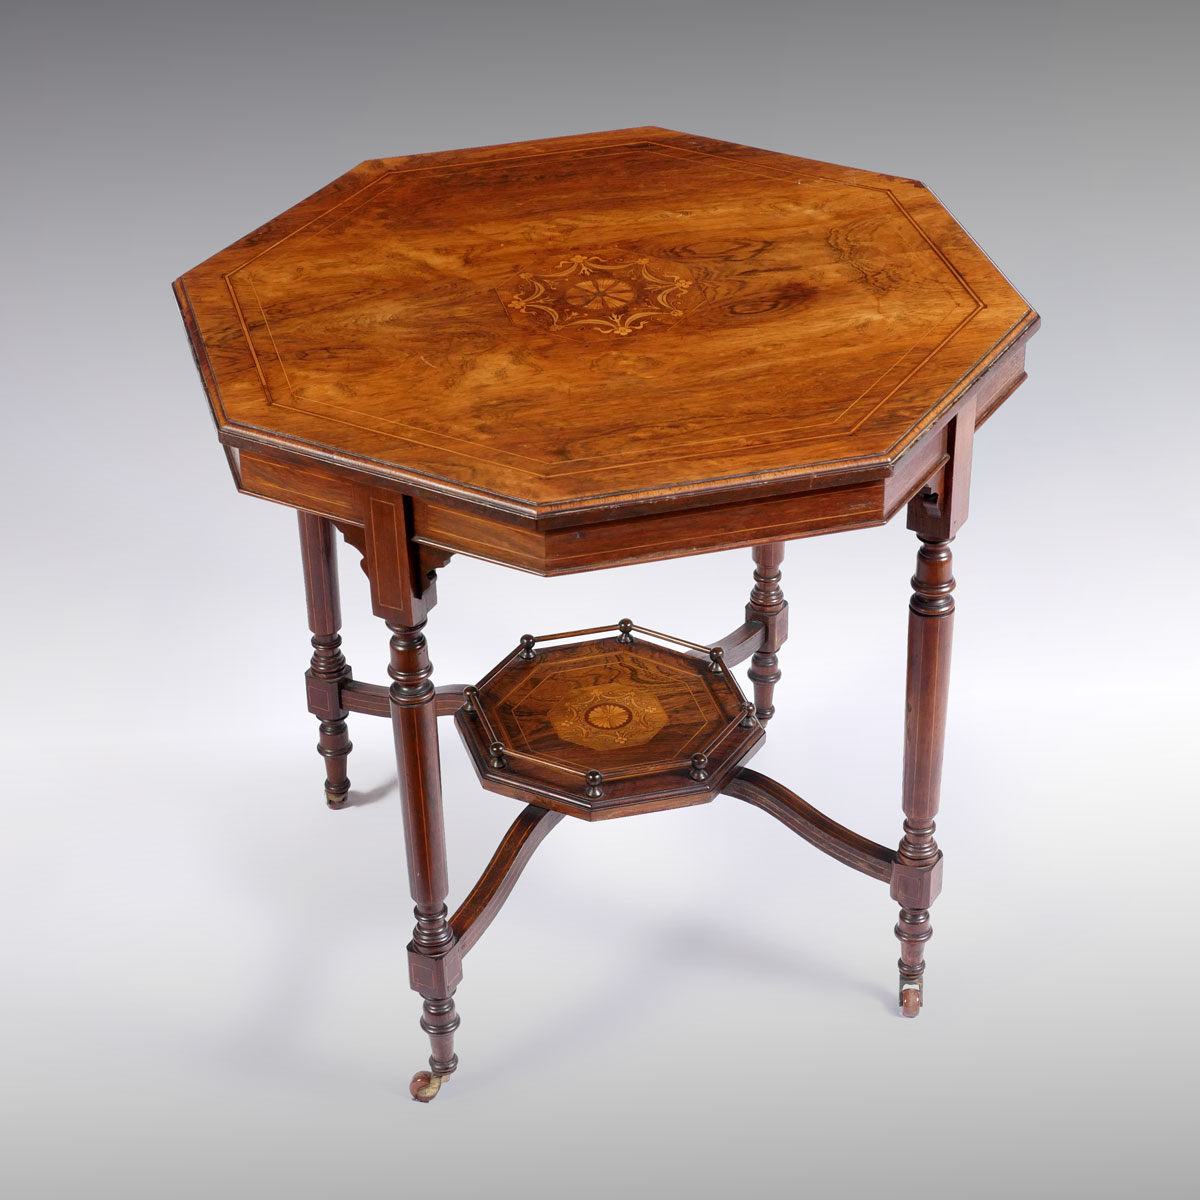 2-TIERED OCTAGONAL INLAID TABLE: